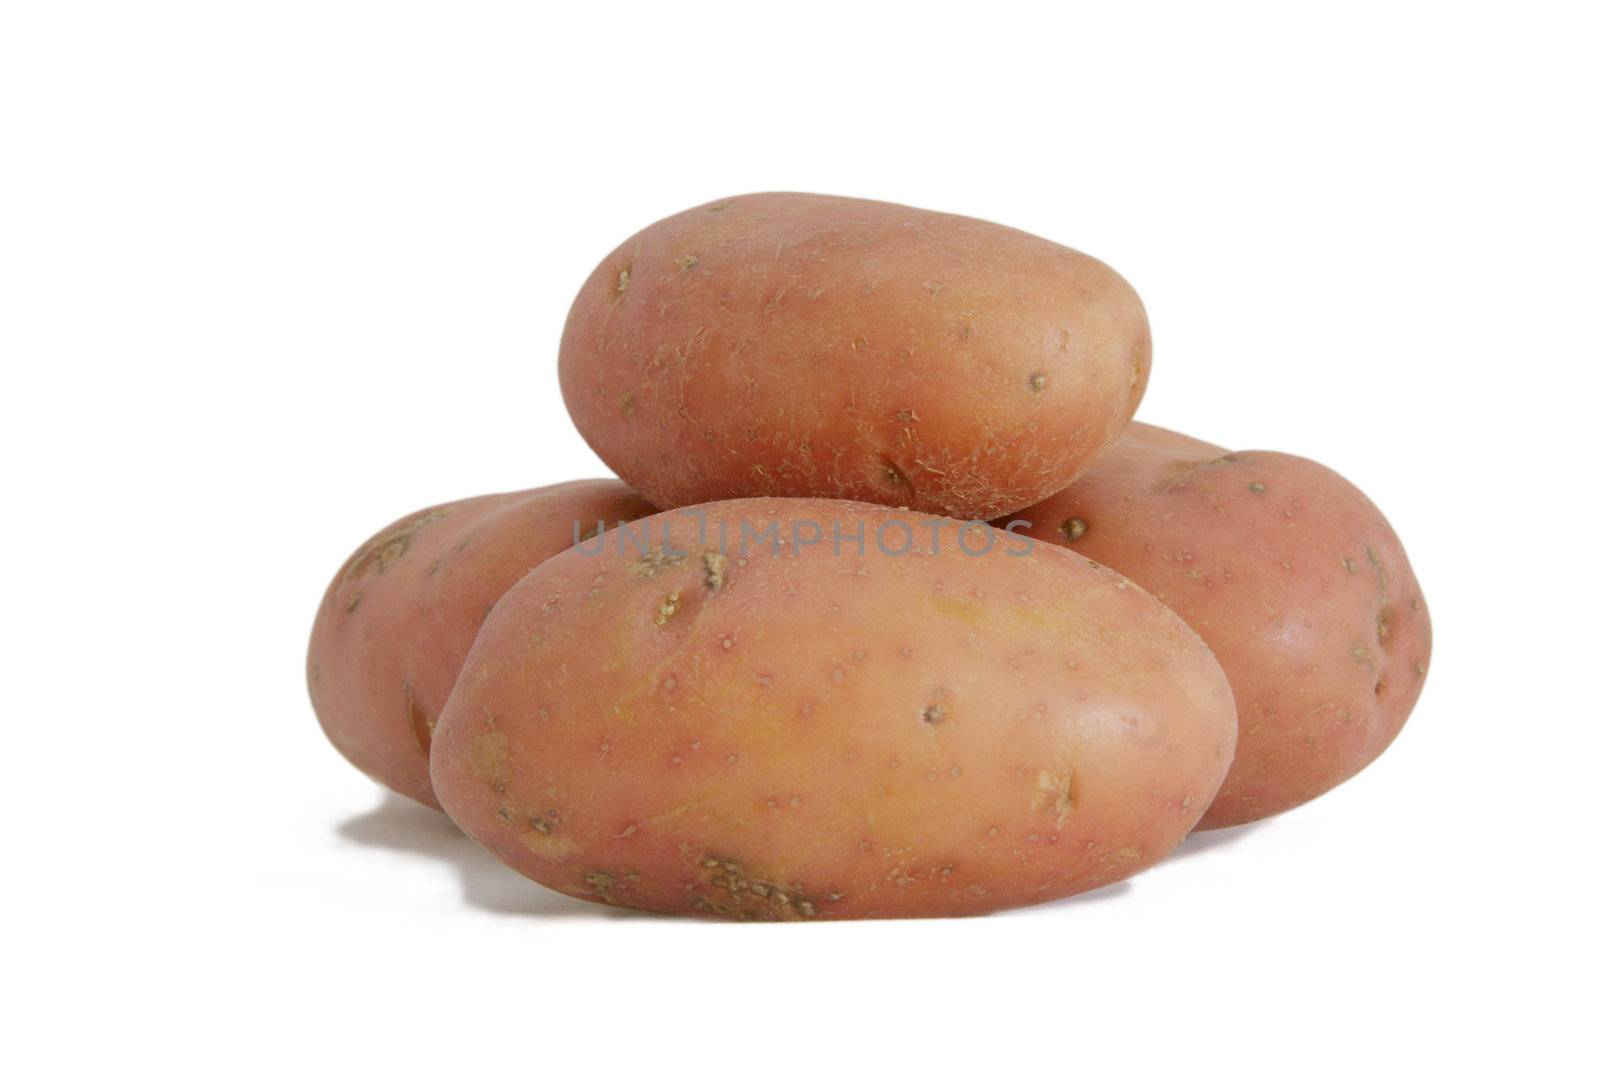 desiree a red skin potato  a very tasty root vegetable